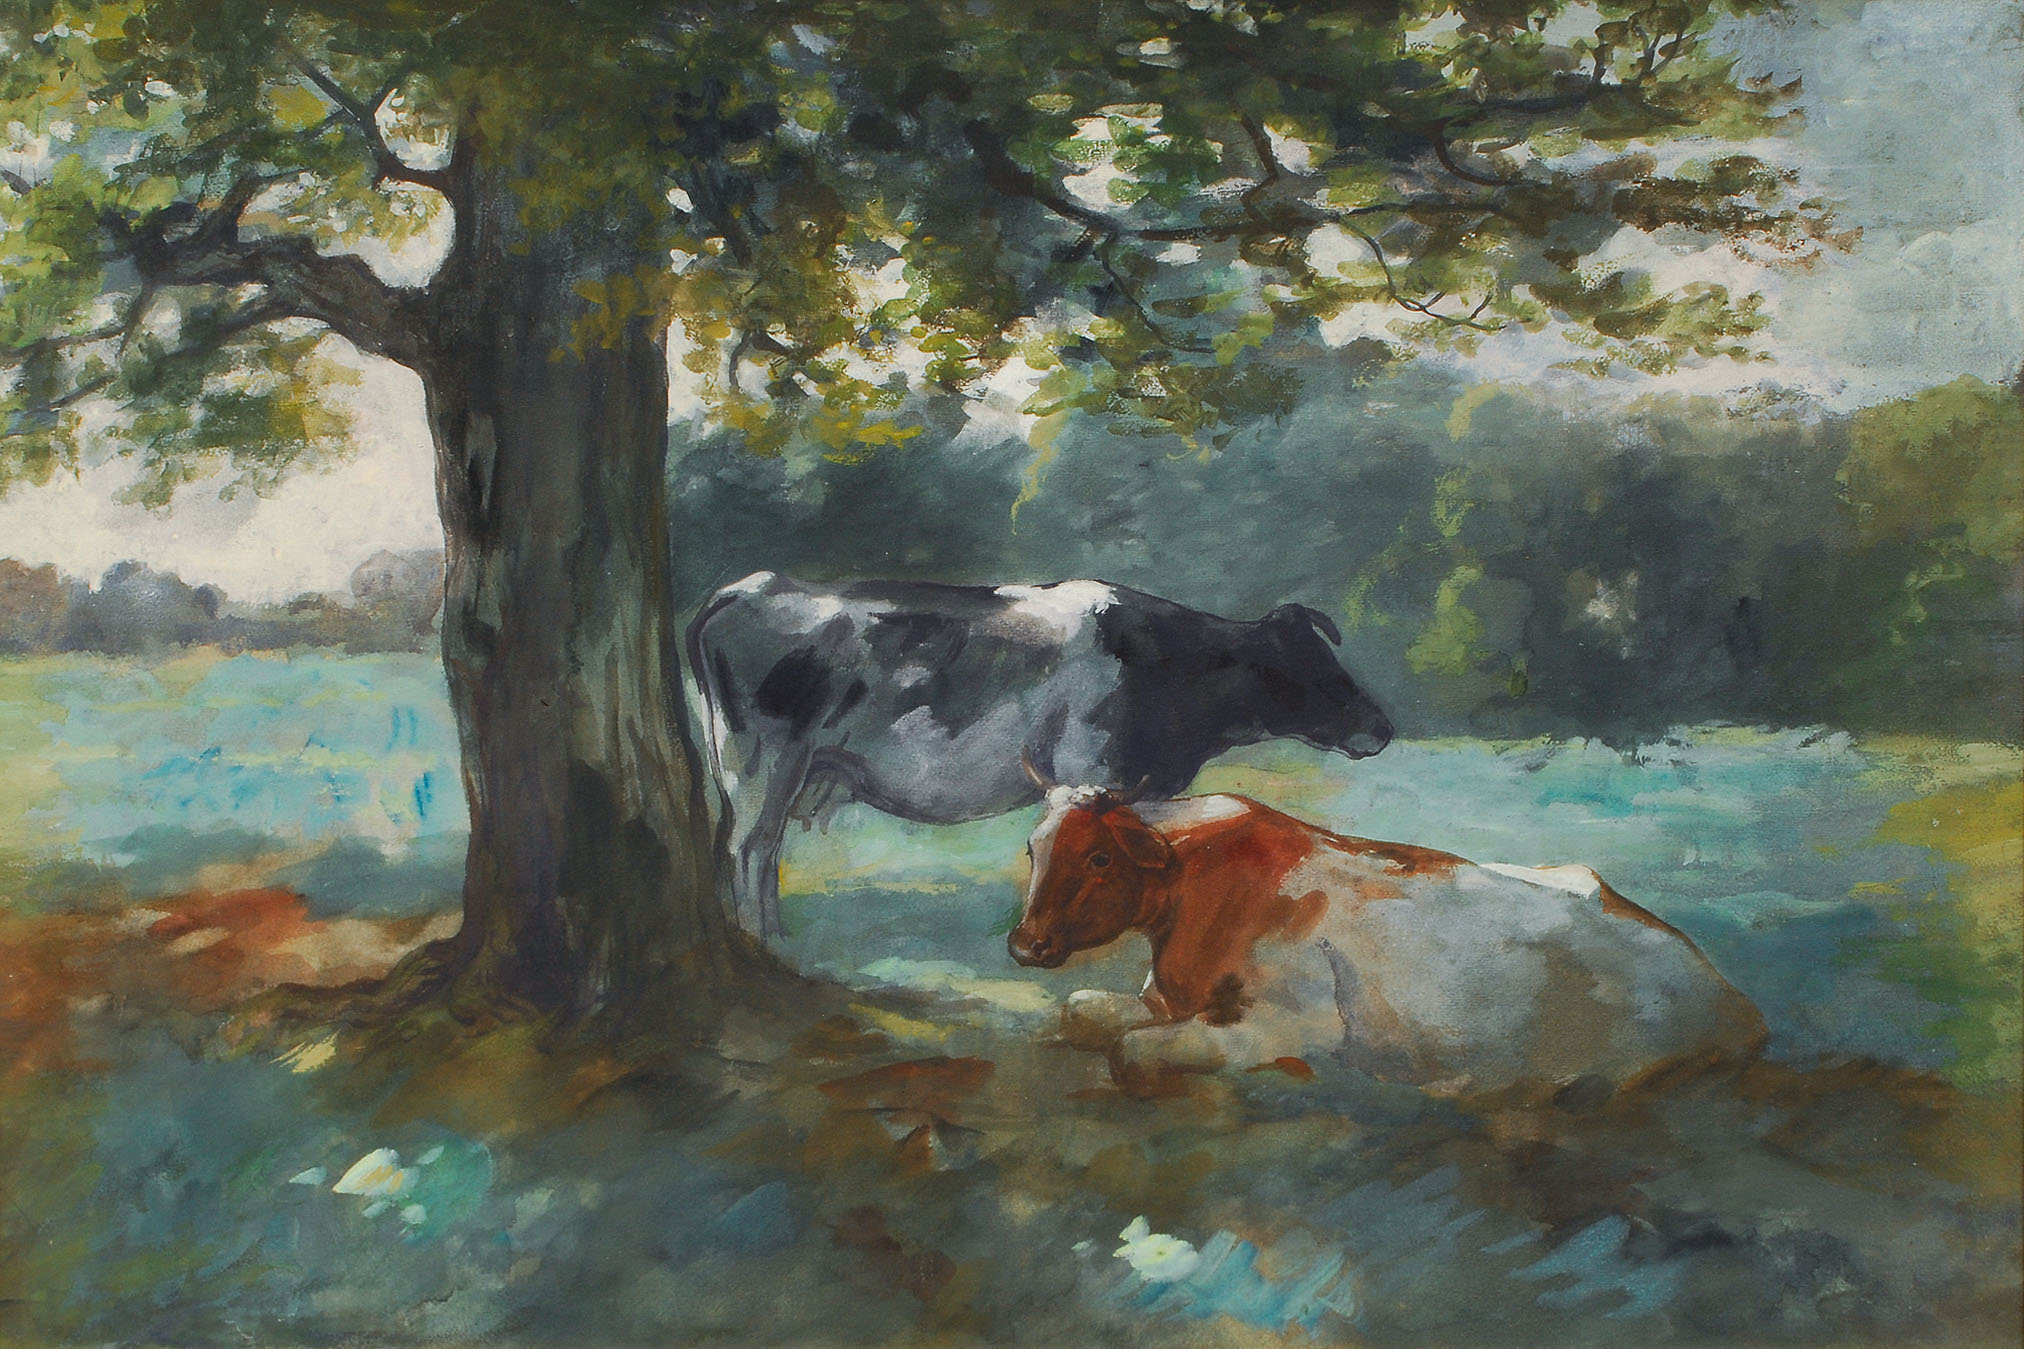 Cattle under a tree